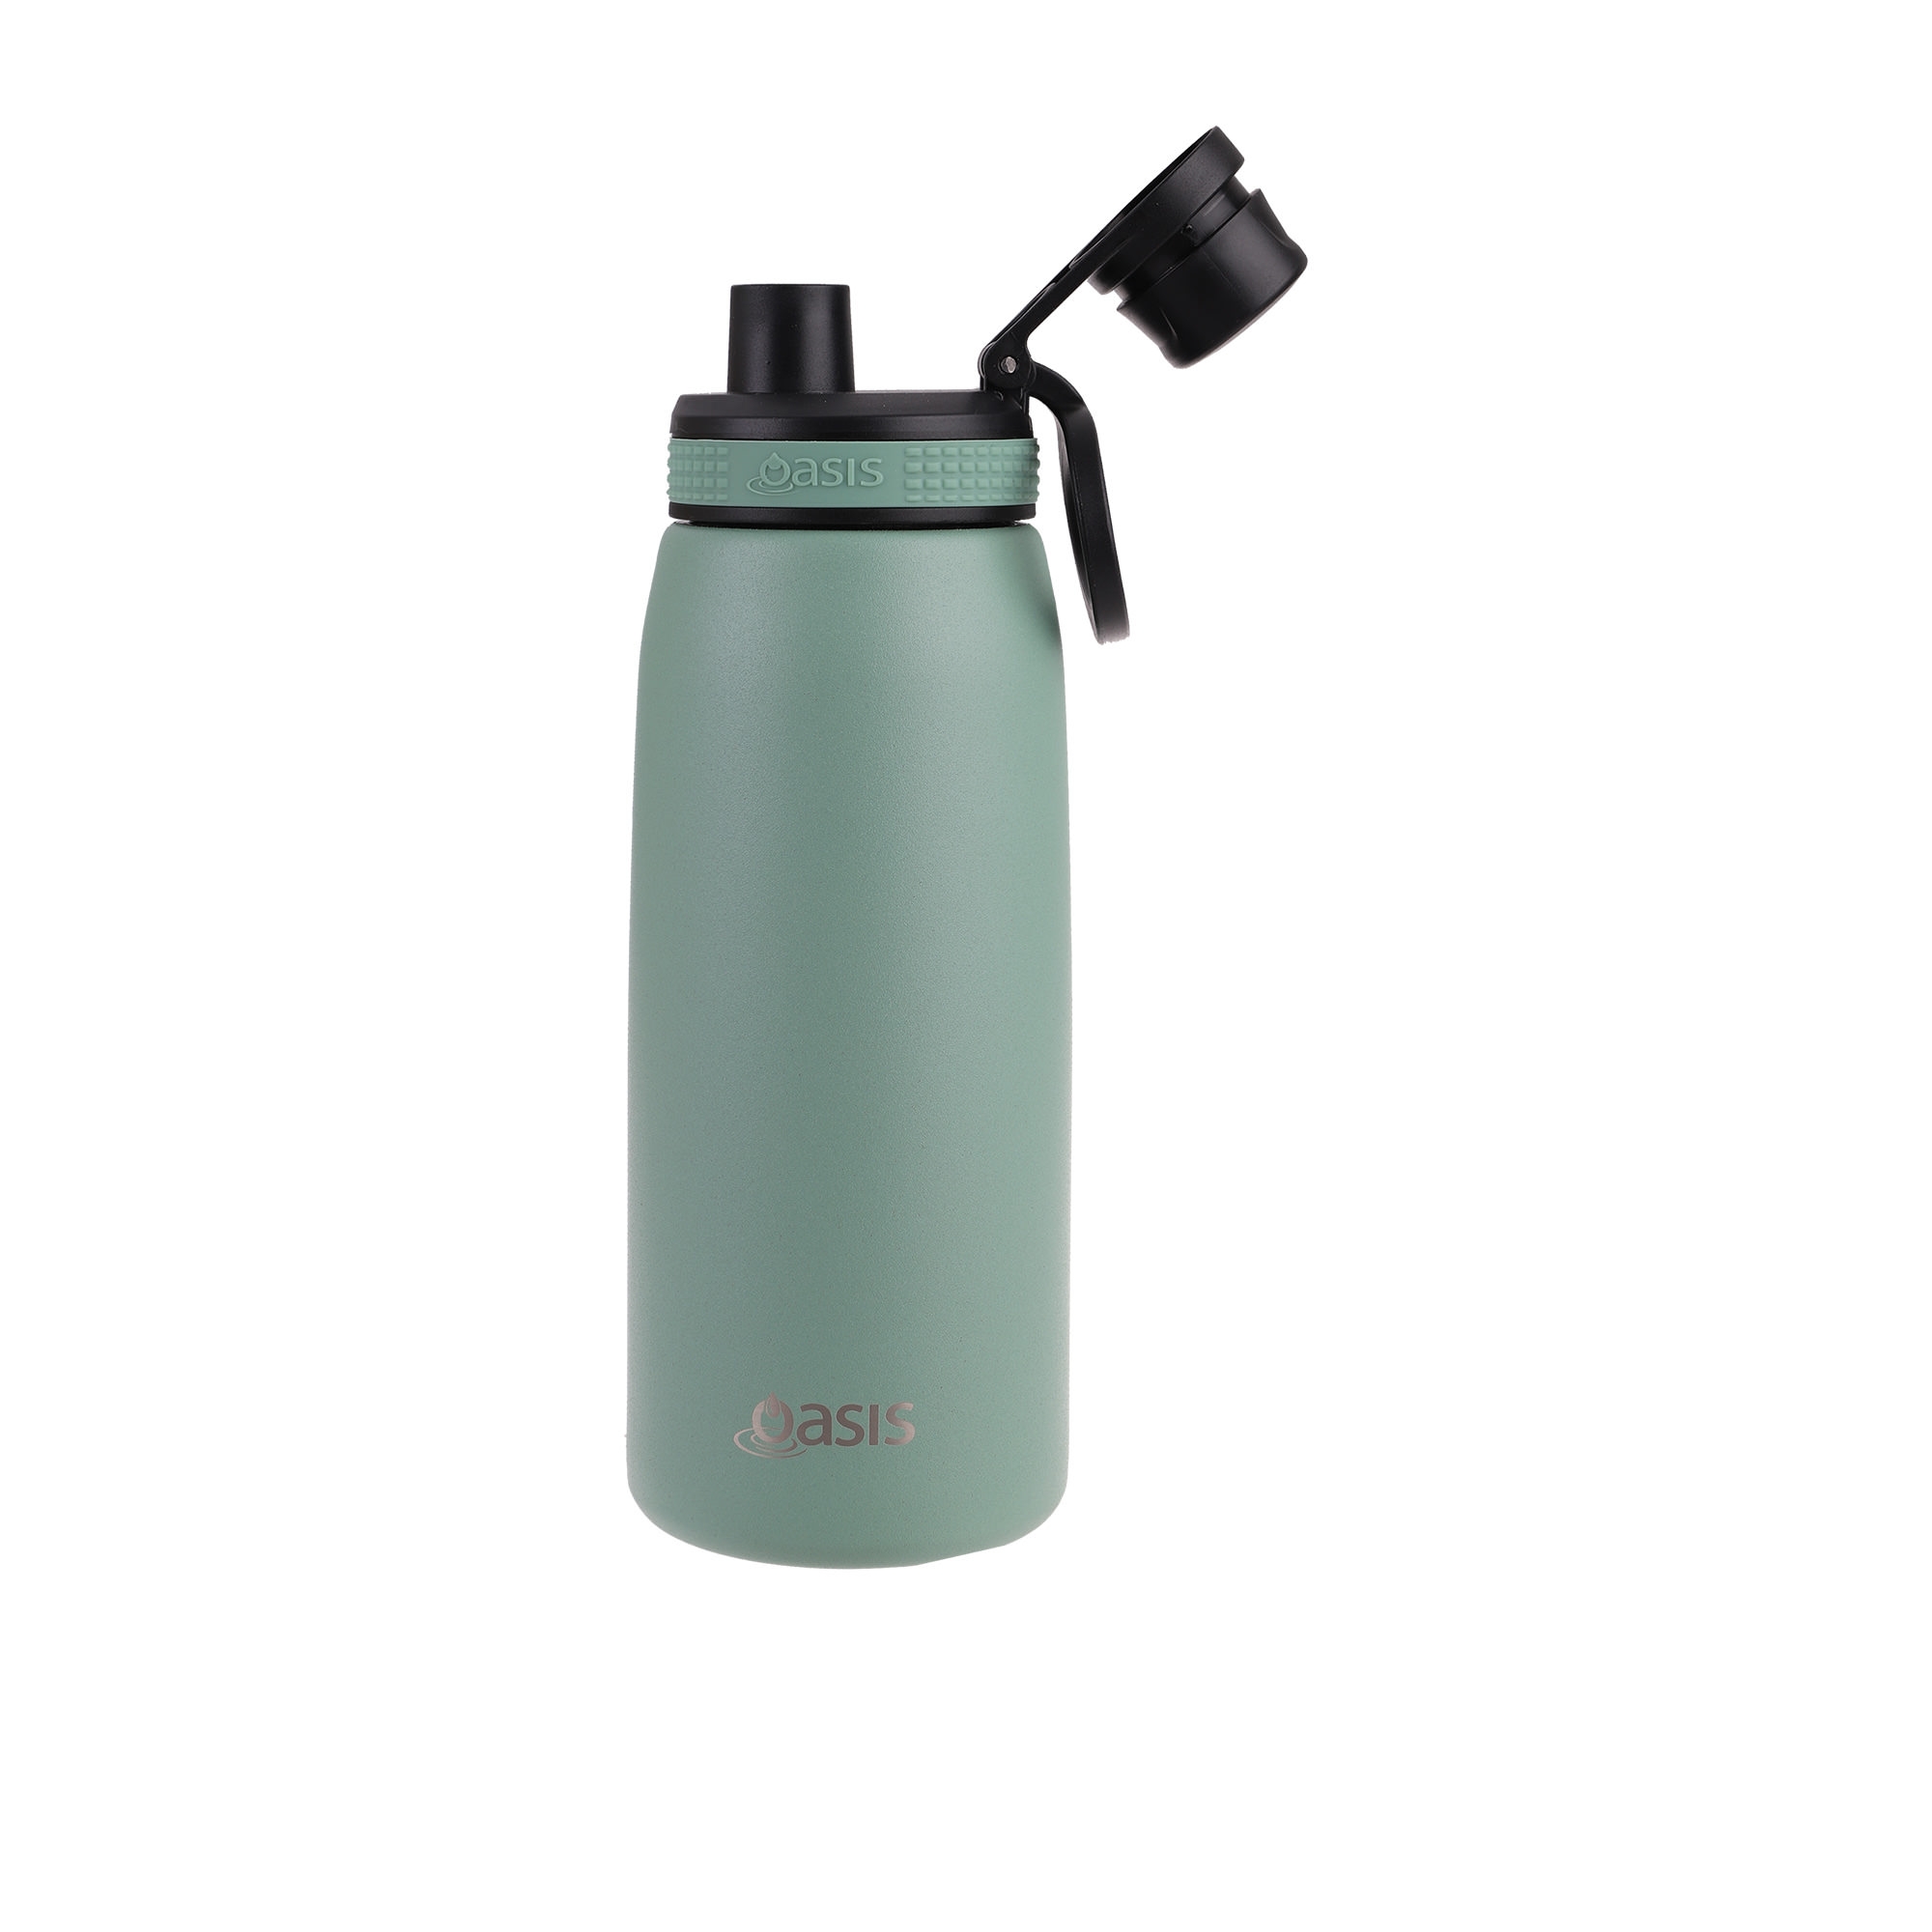 Oasis Double Wall Insulated Sports Bottle 780ml Sage Green Image 2